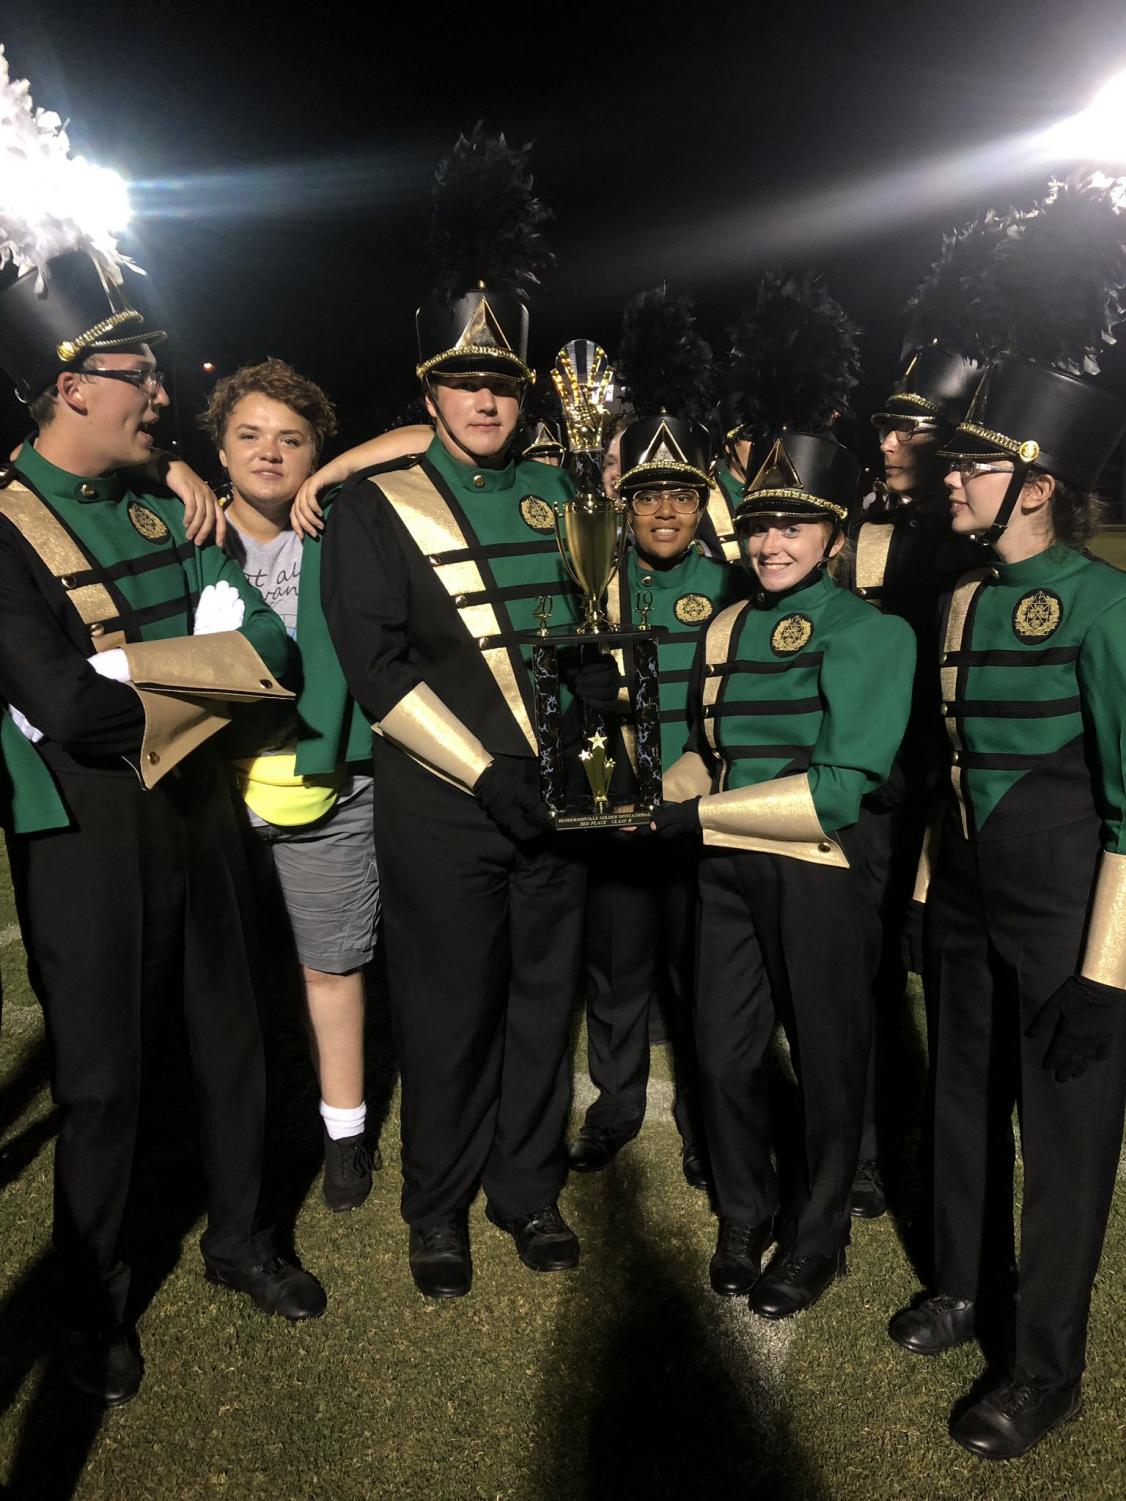 Not+All+Who+Wander+Are+Lost+is+the+title+of+the+2019+Hillsboro+Marching+Band+Show